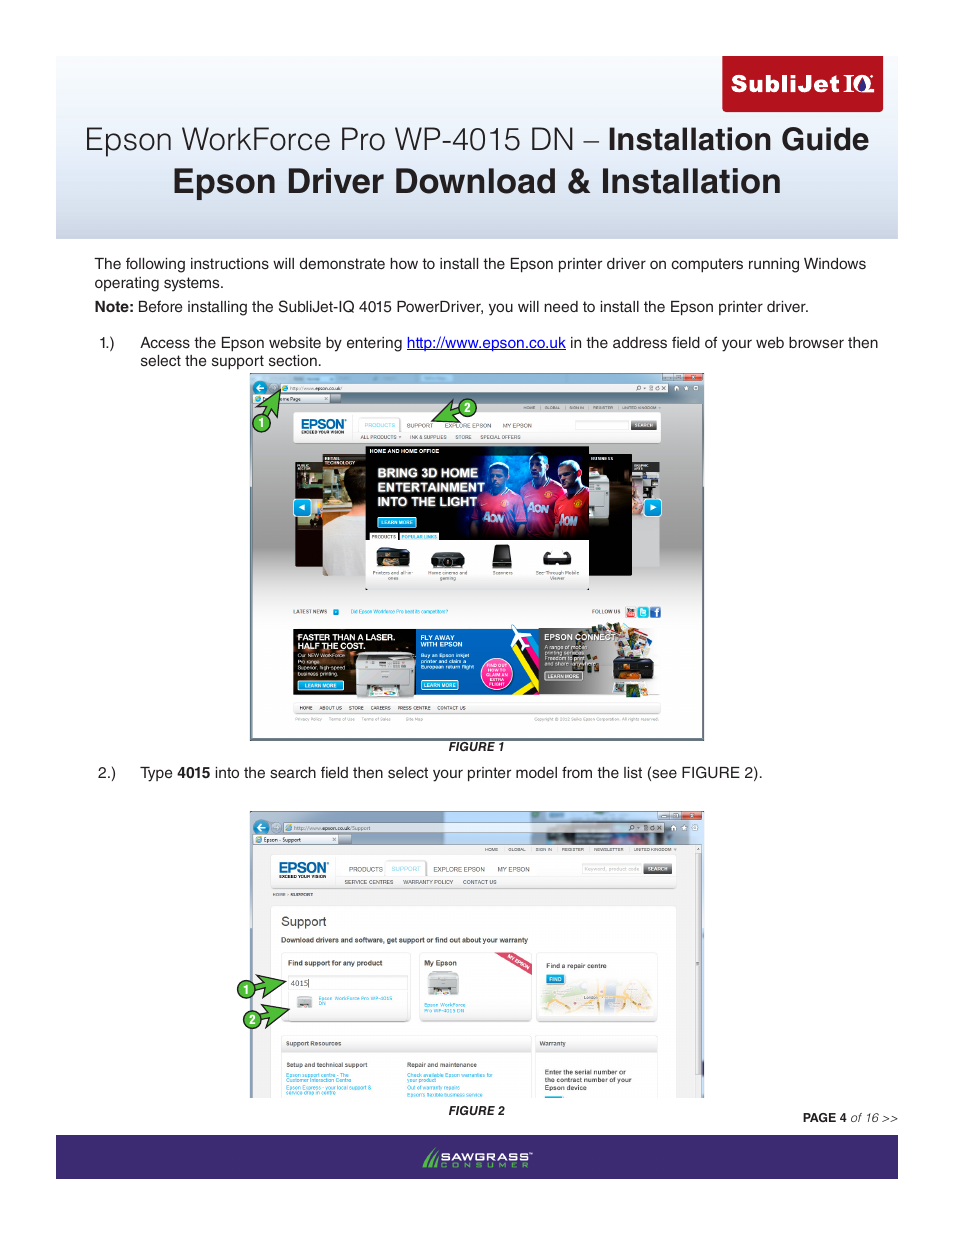 Epson driver download & installation | Xpres SubliJet IQ Epson WP-4015  (Power Driver Setup): Power Driver Installation Guide User Manual | Page 4  / 16